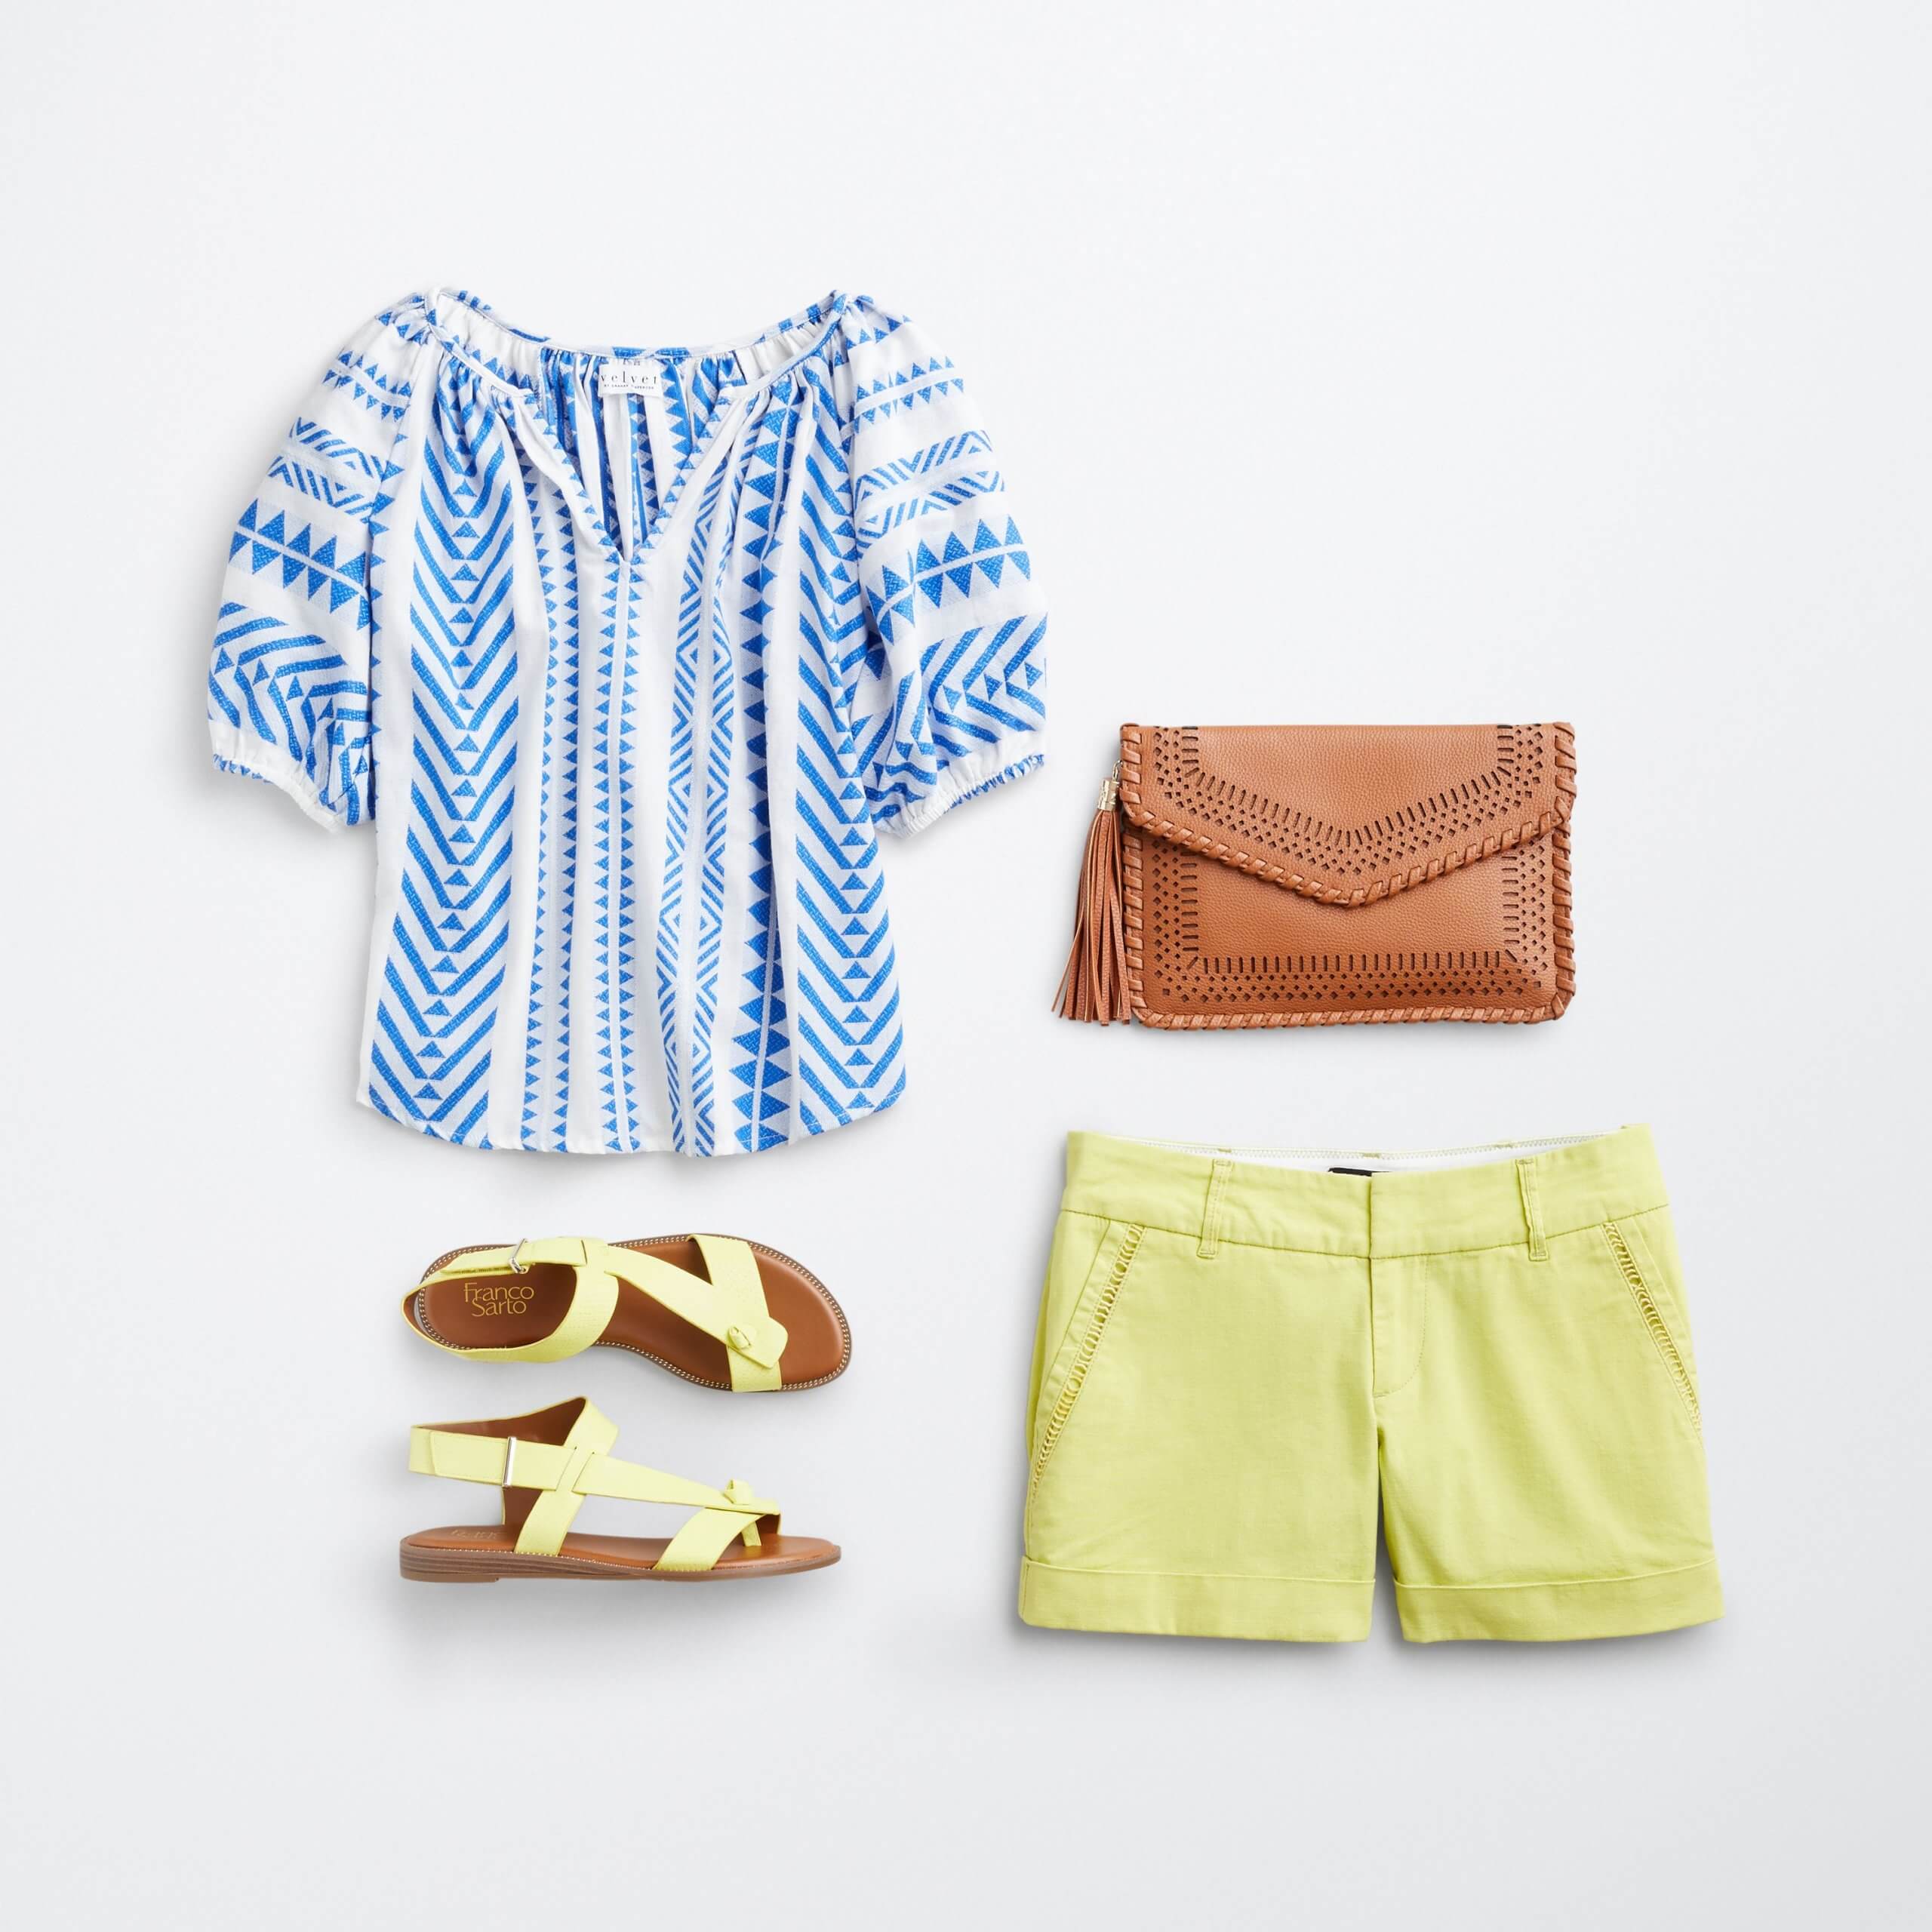 Stitch Fix Women's outfit laydown featuring blue and white printed shirt, brown clutch, yellow strappy sandals and yellow shorts. 